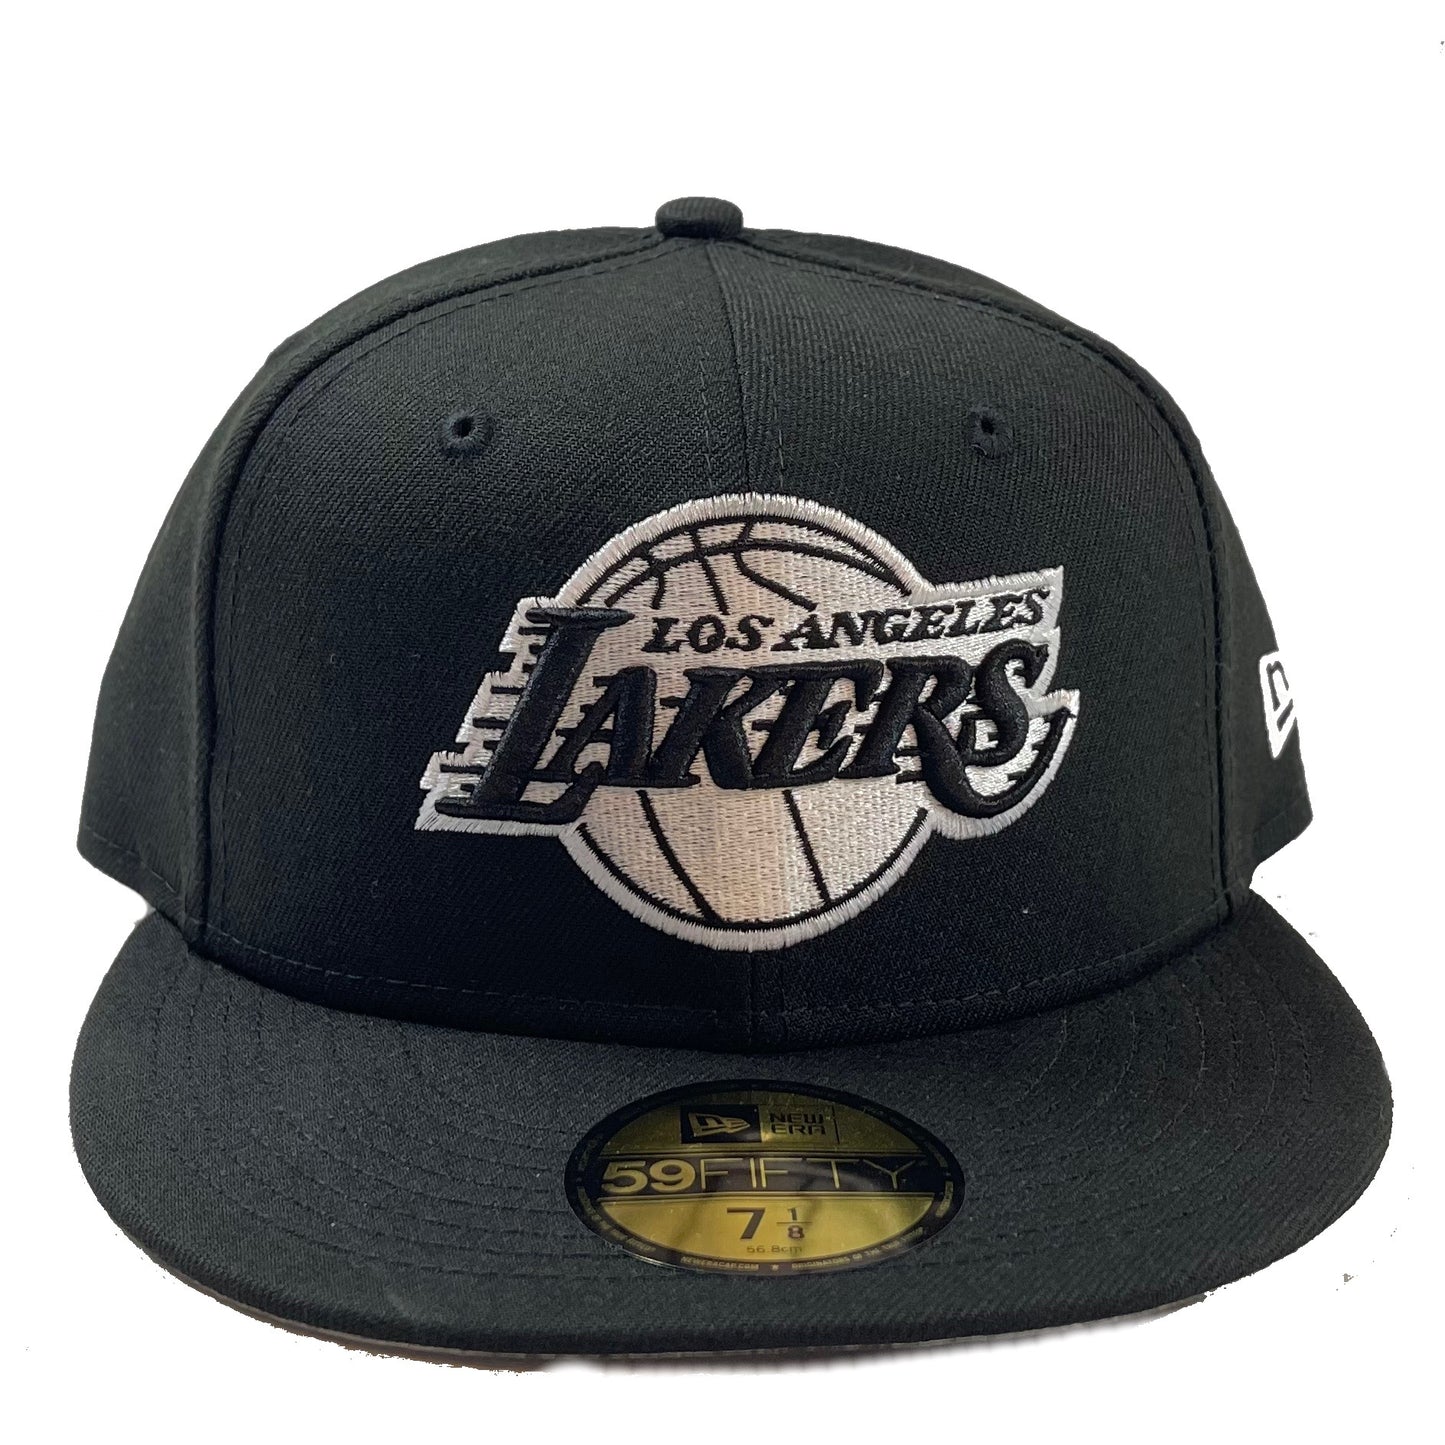 Los Angeles Lakers (Black) Fitted